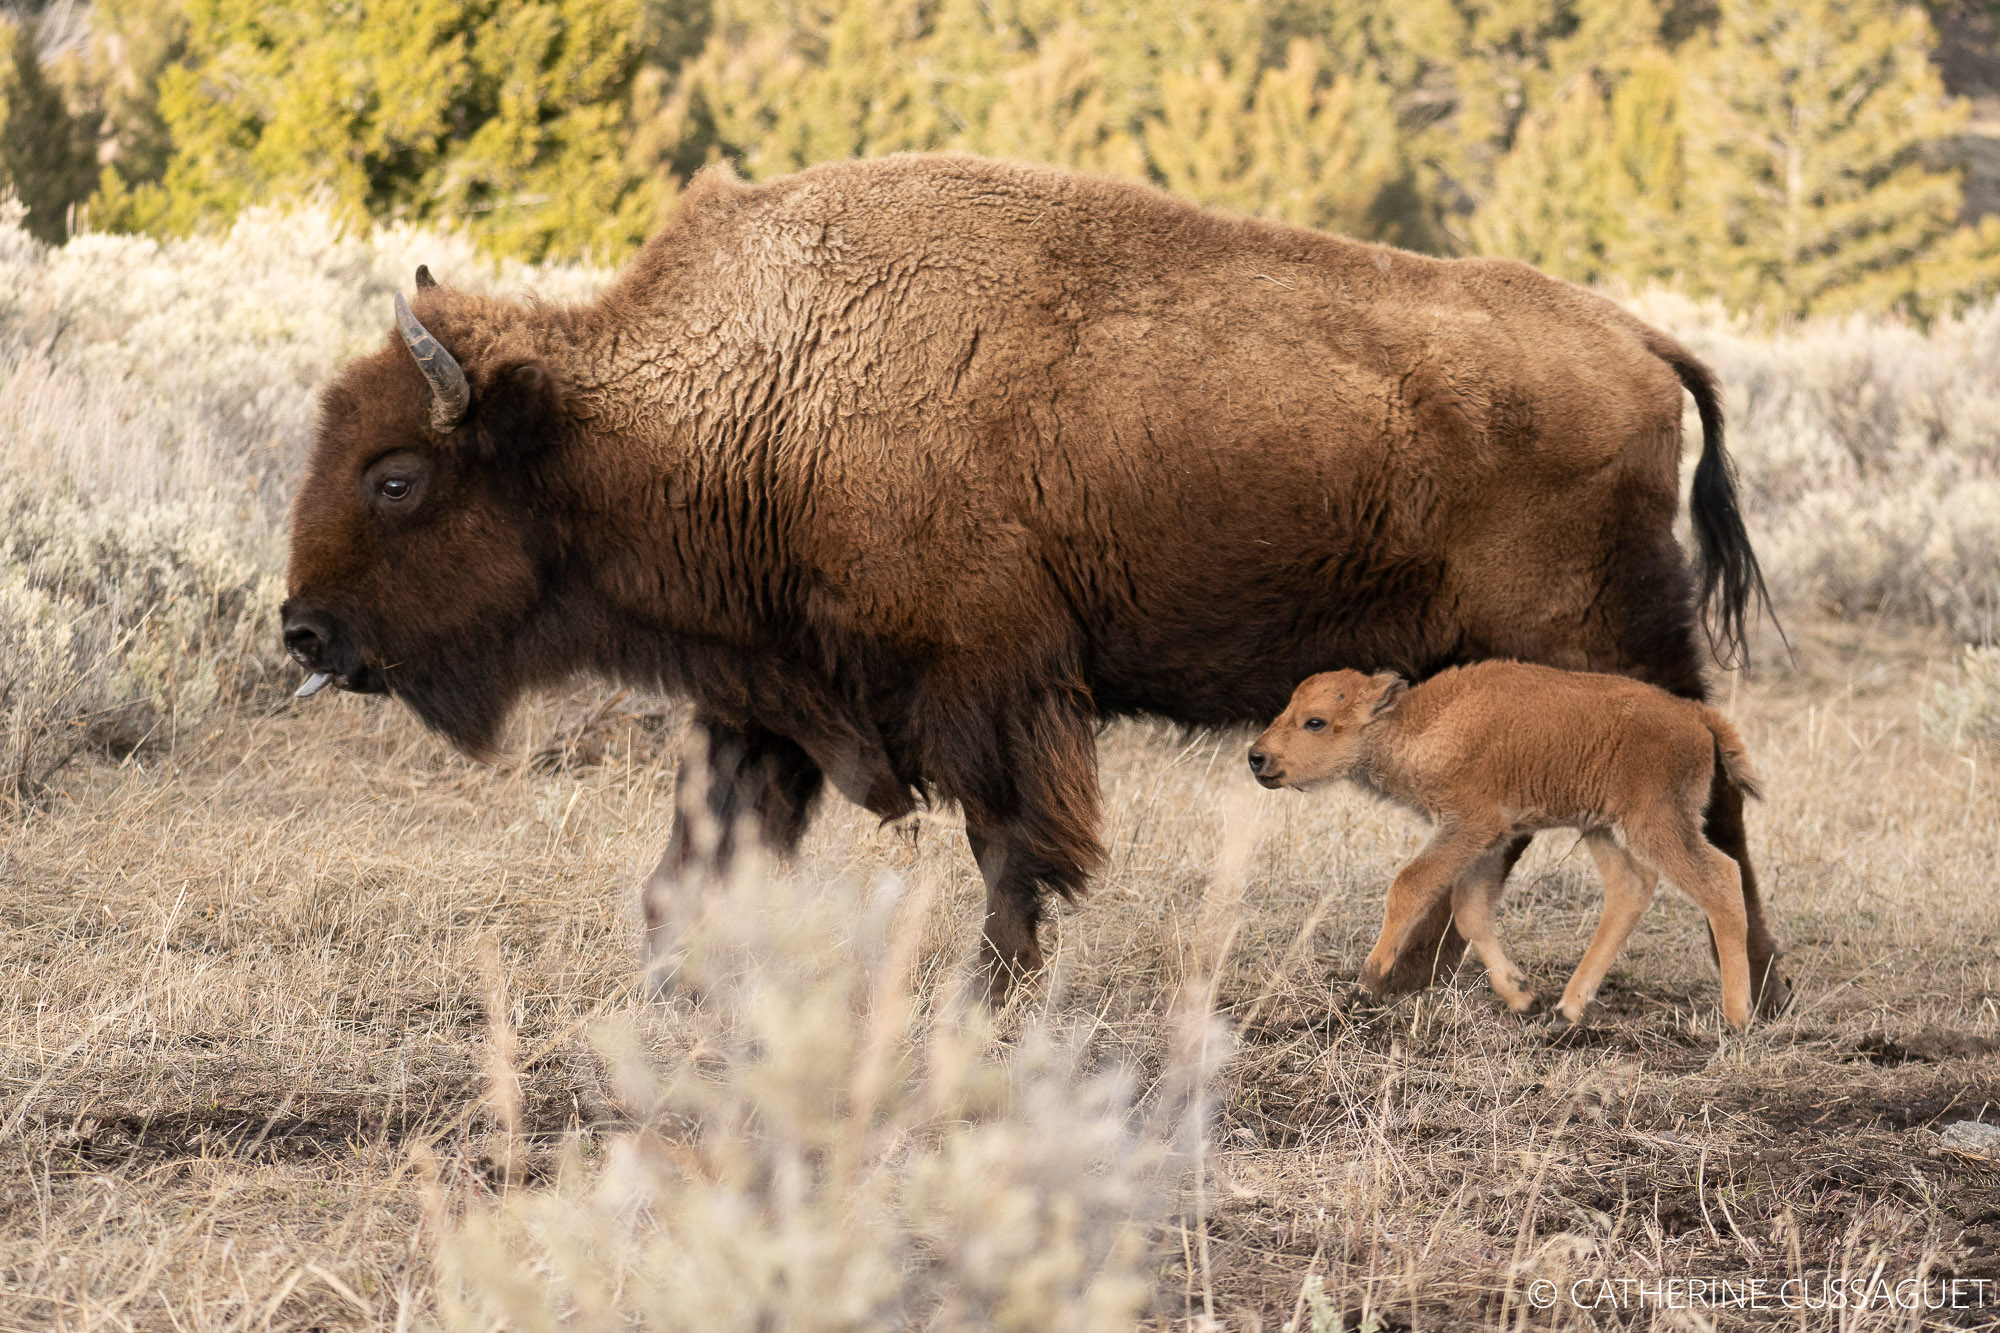 Mom and baby bison walking